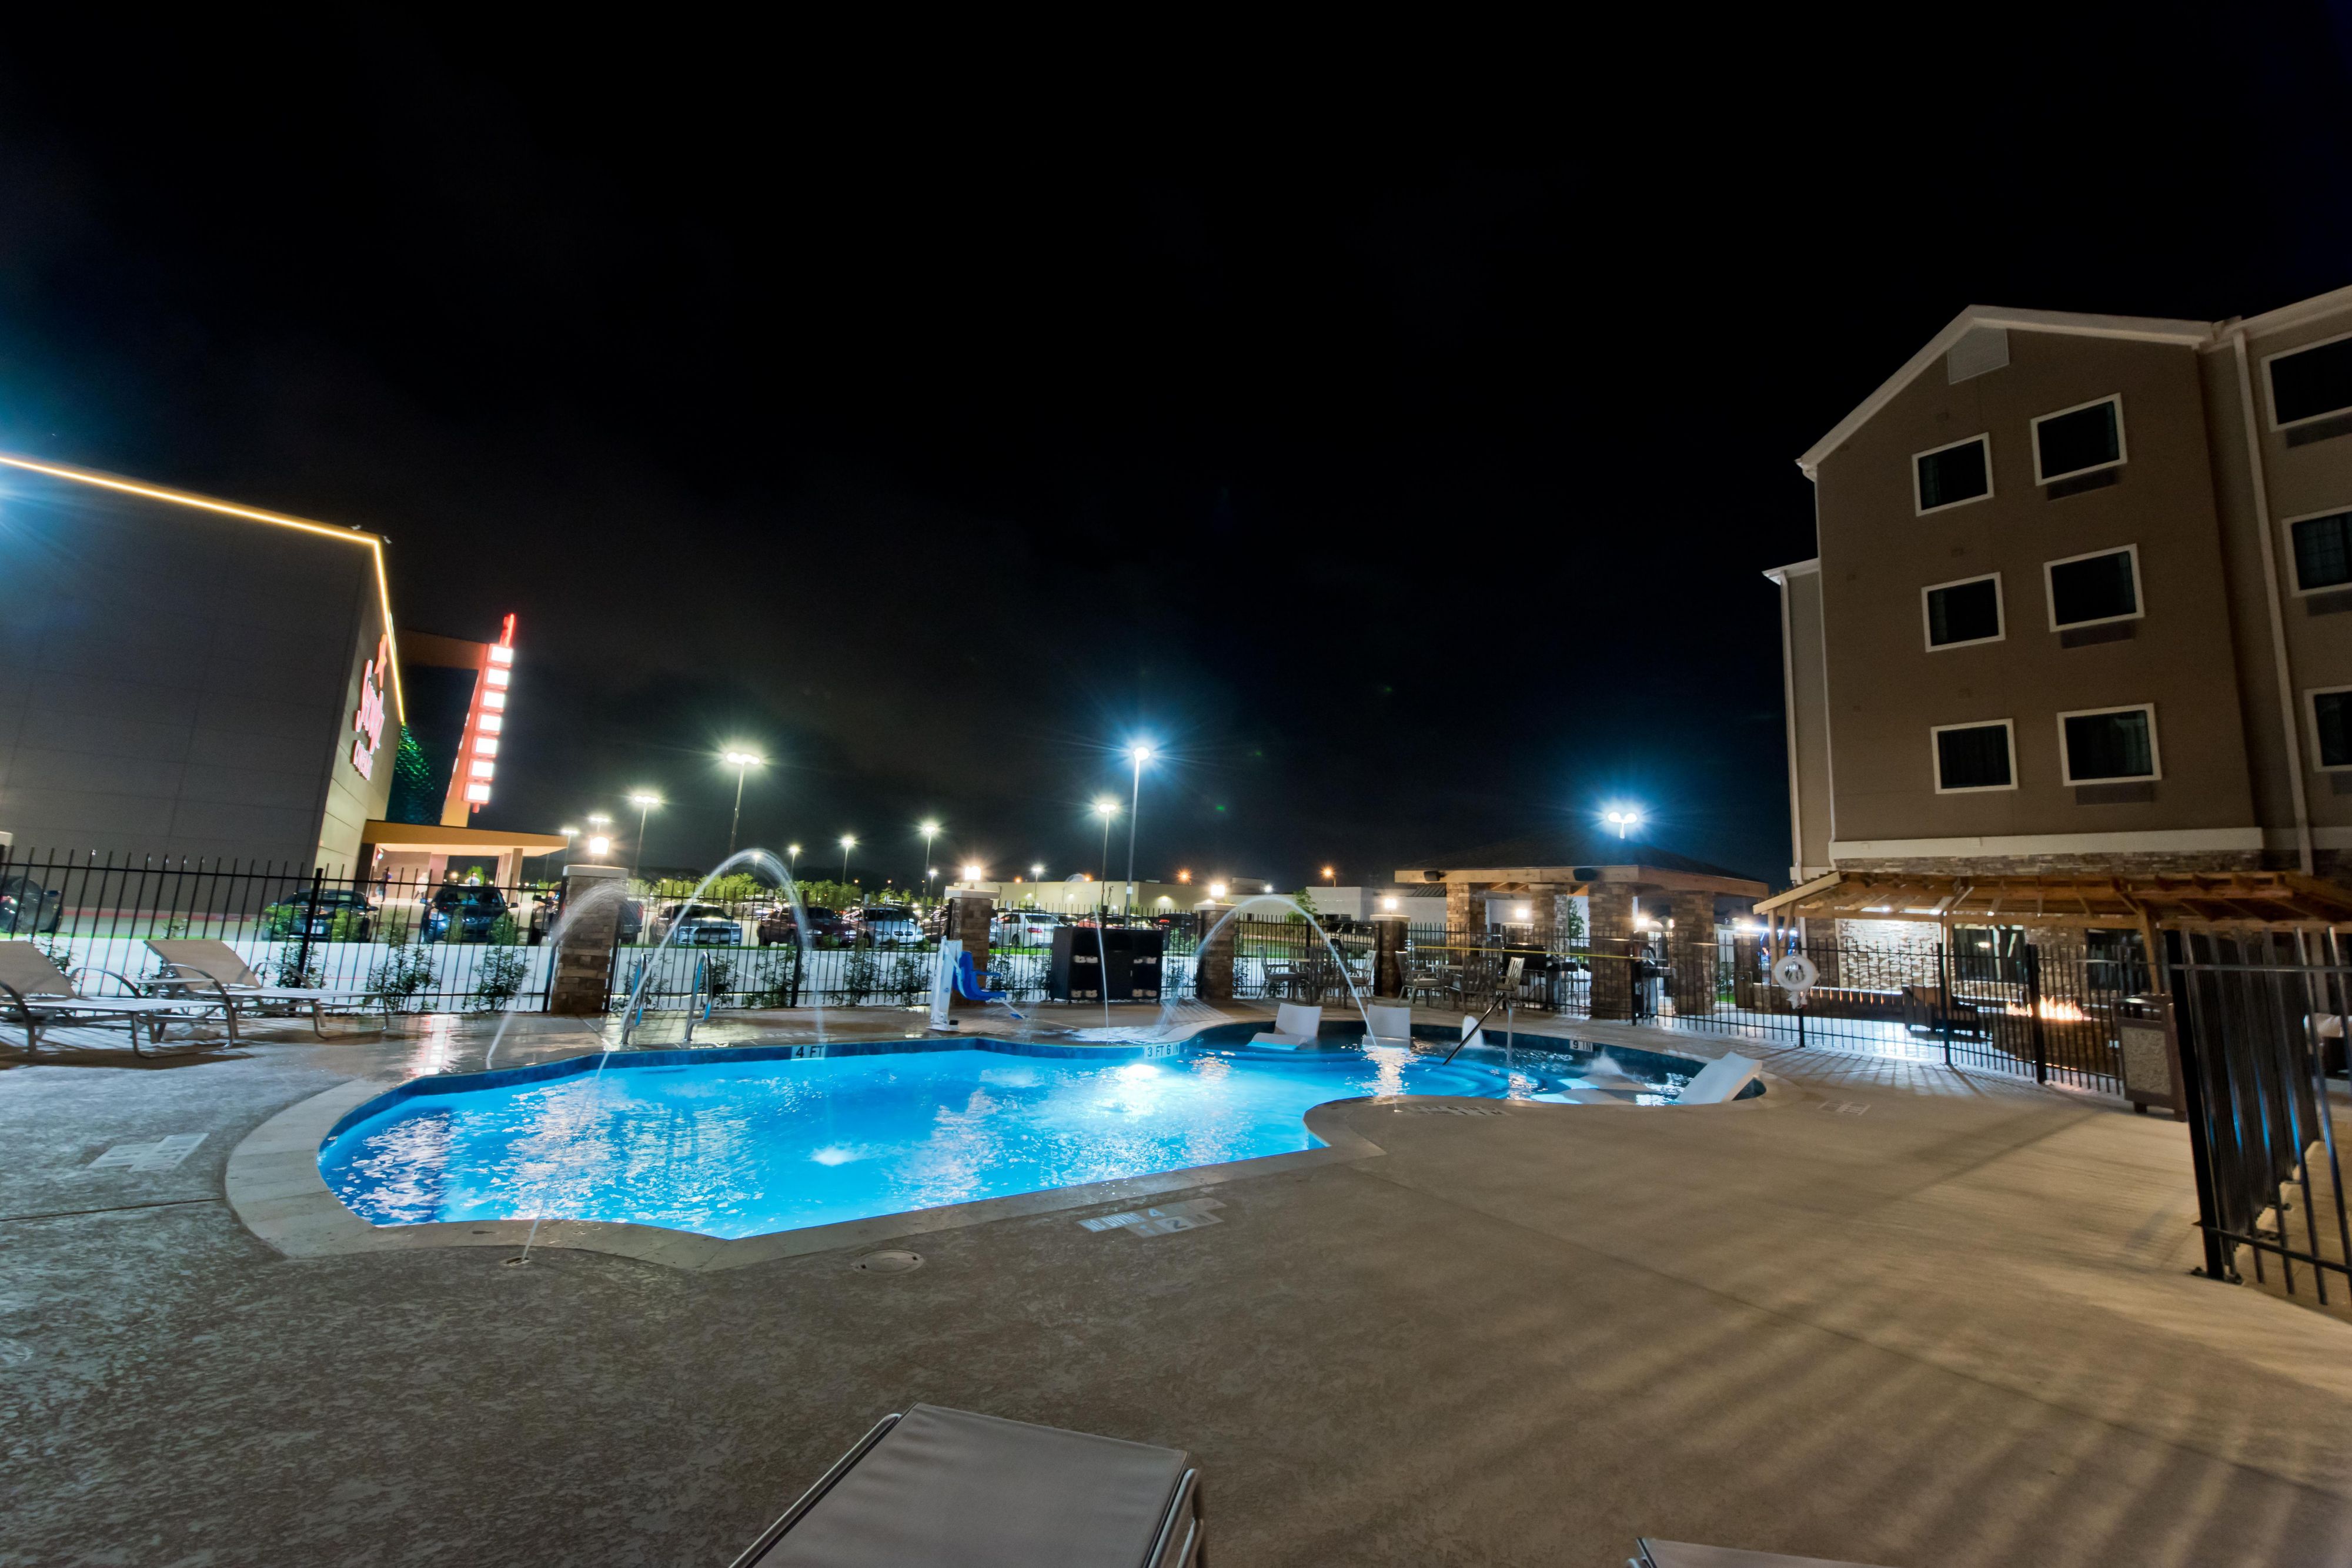 The pool is amazing. The grills are always ready to be used and the fire pit is perfect for every evening.